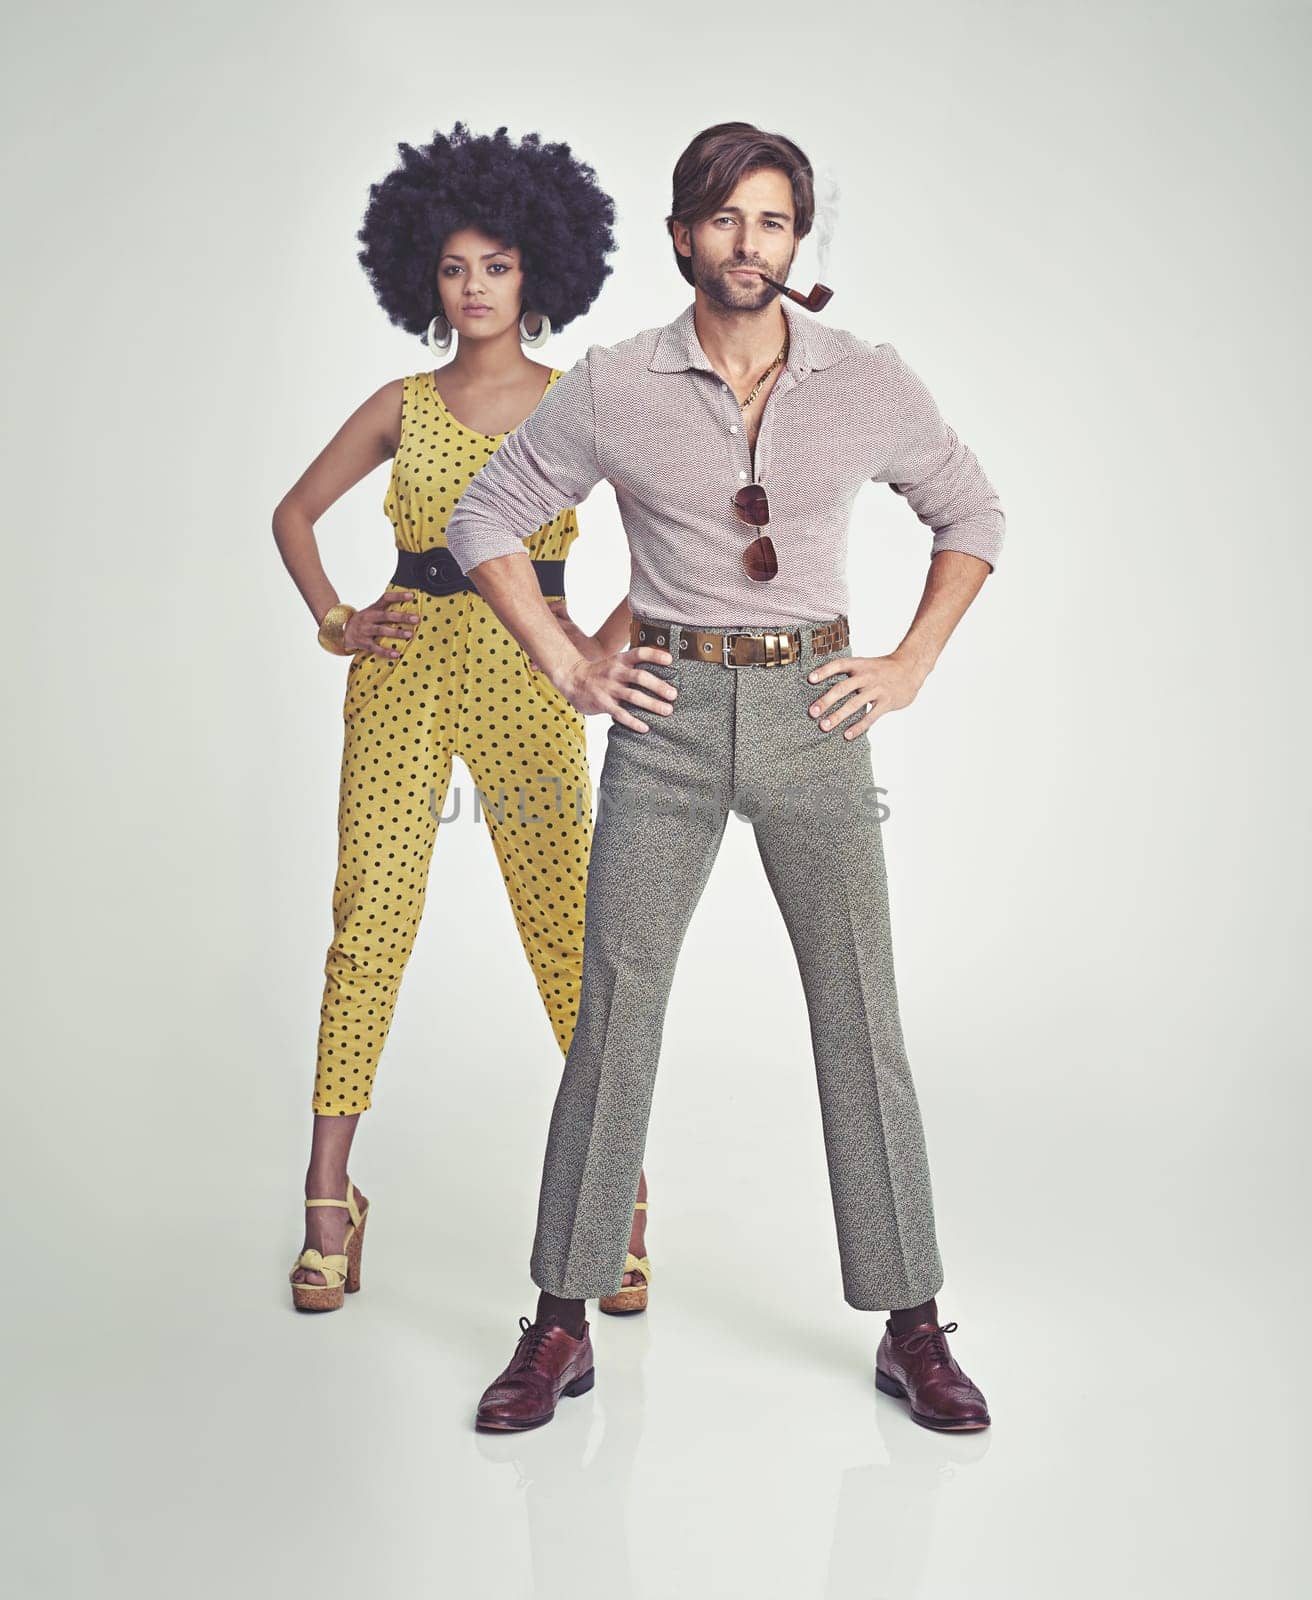 Couple, portrait and fashion in confidence with pipe for smoking, style or outfit on a gray studio background. Interracial man, woman or smoker in stylish retro and vintage pants, shirt or jumpsuit by YuriArcurs